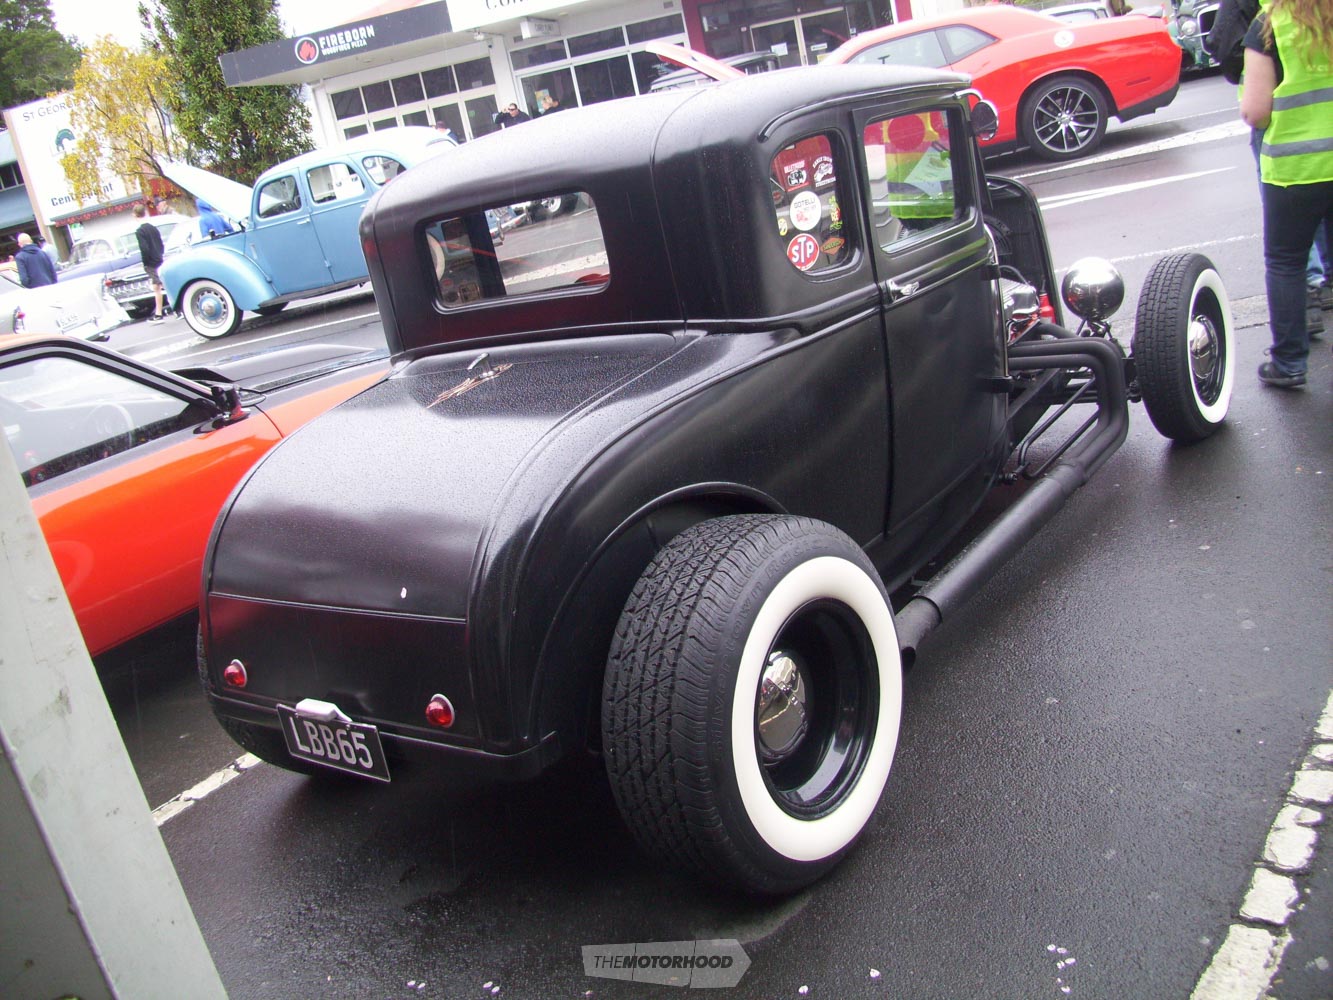 Jamie Klinac's couple is the true meaning of a traditional styled Hot Rod. _.jpg